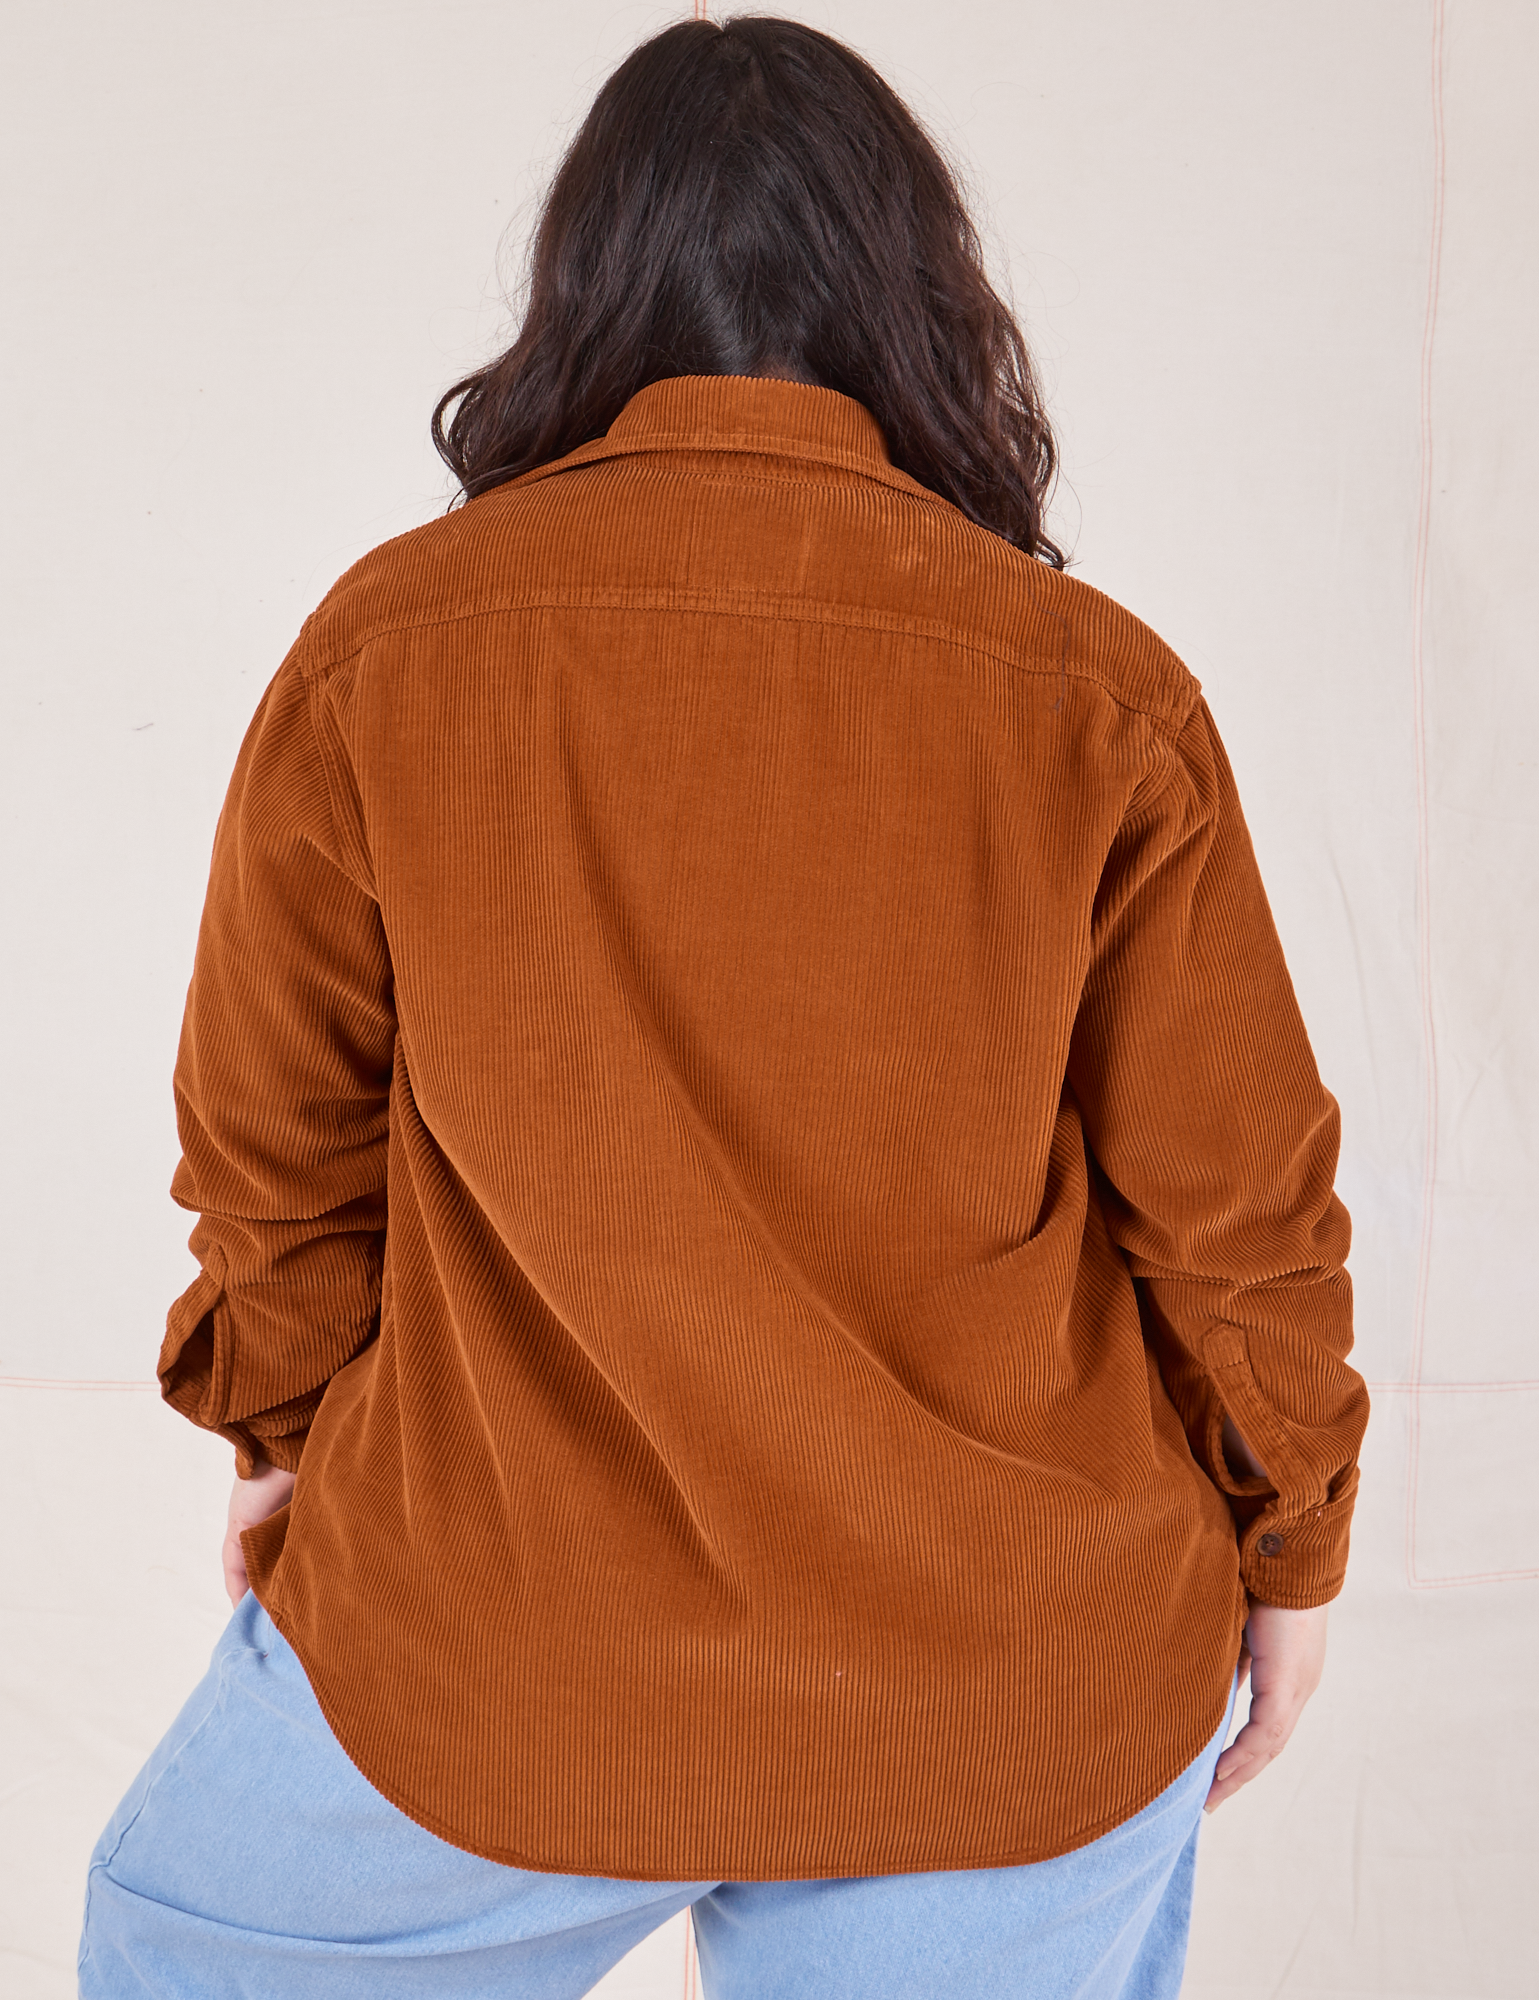 Back view of Corduroy Overshirt in Burnt Terracotta on Ashley